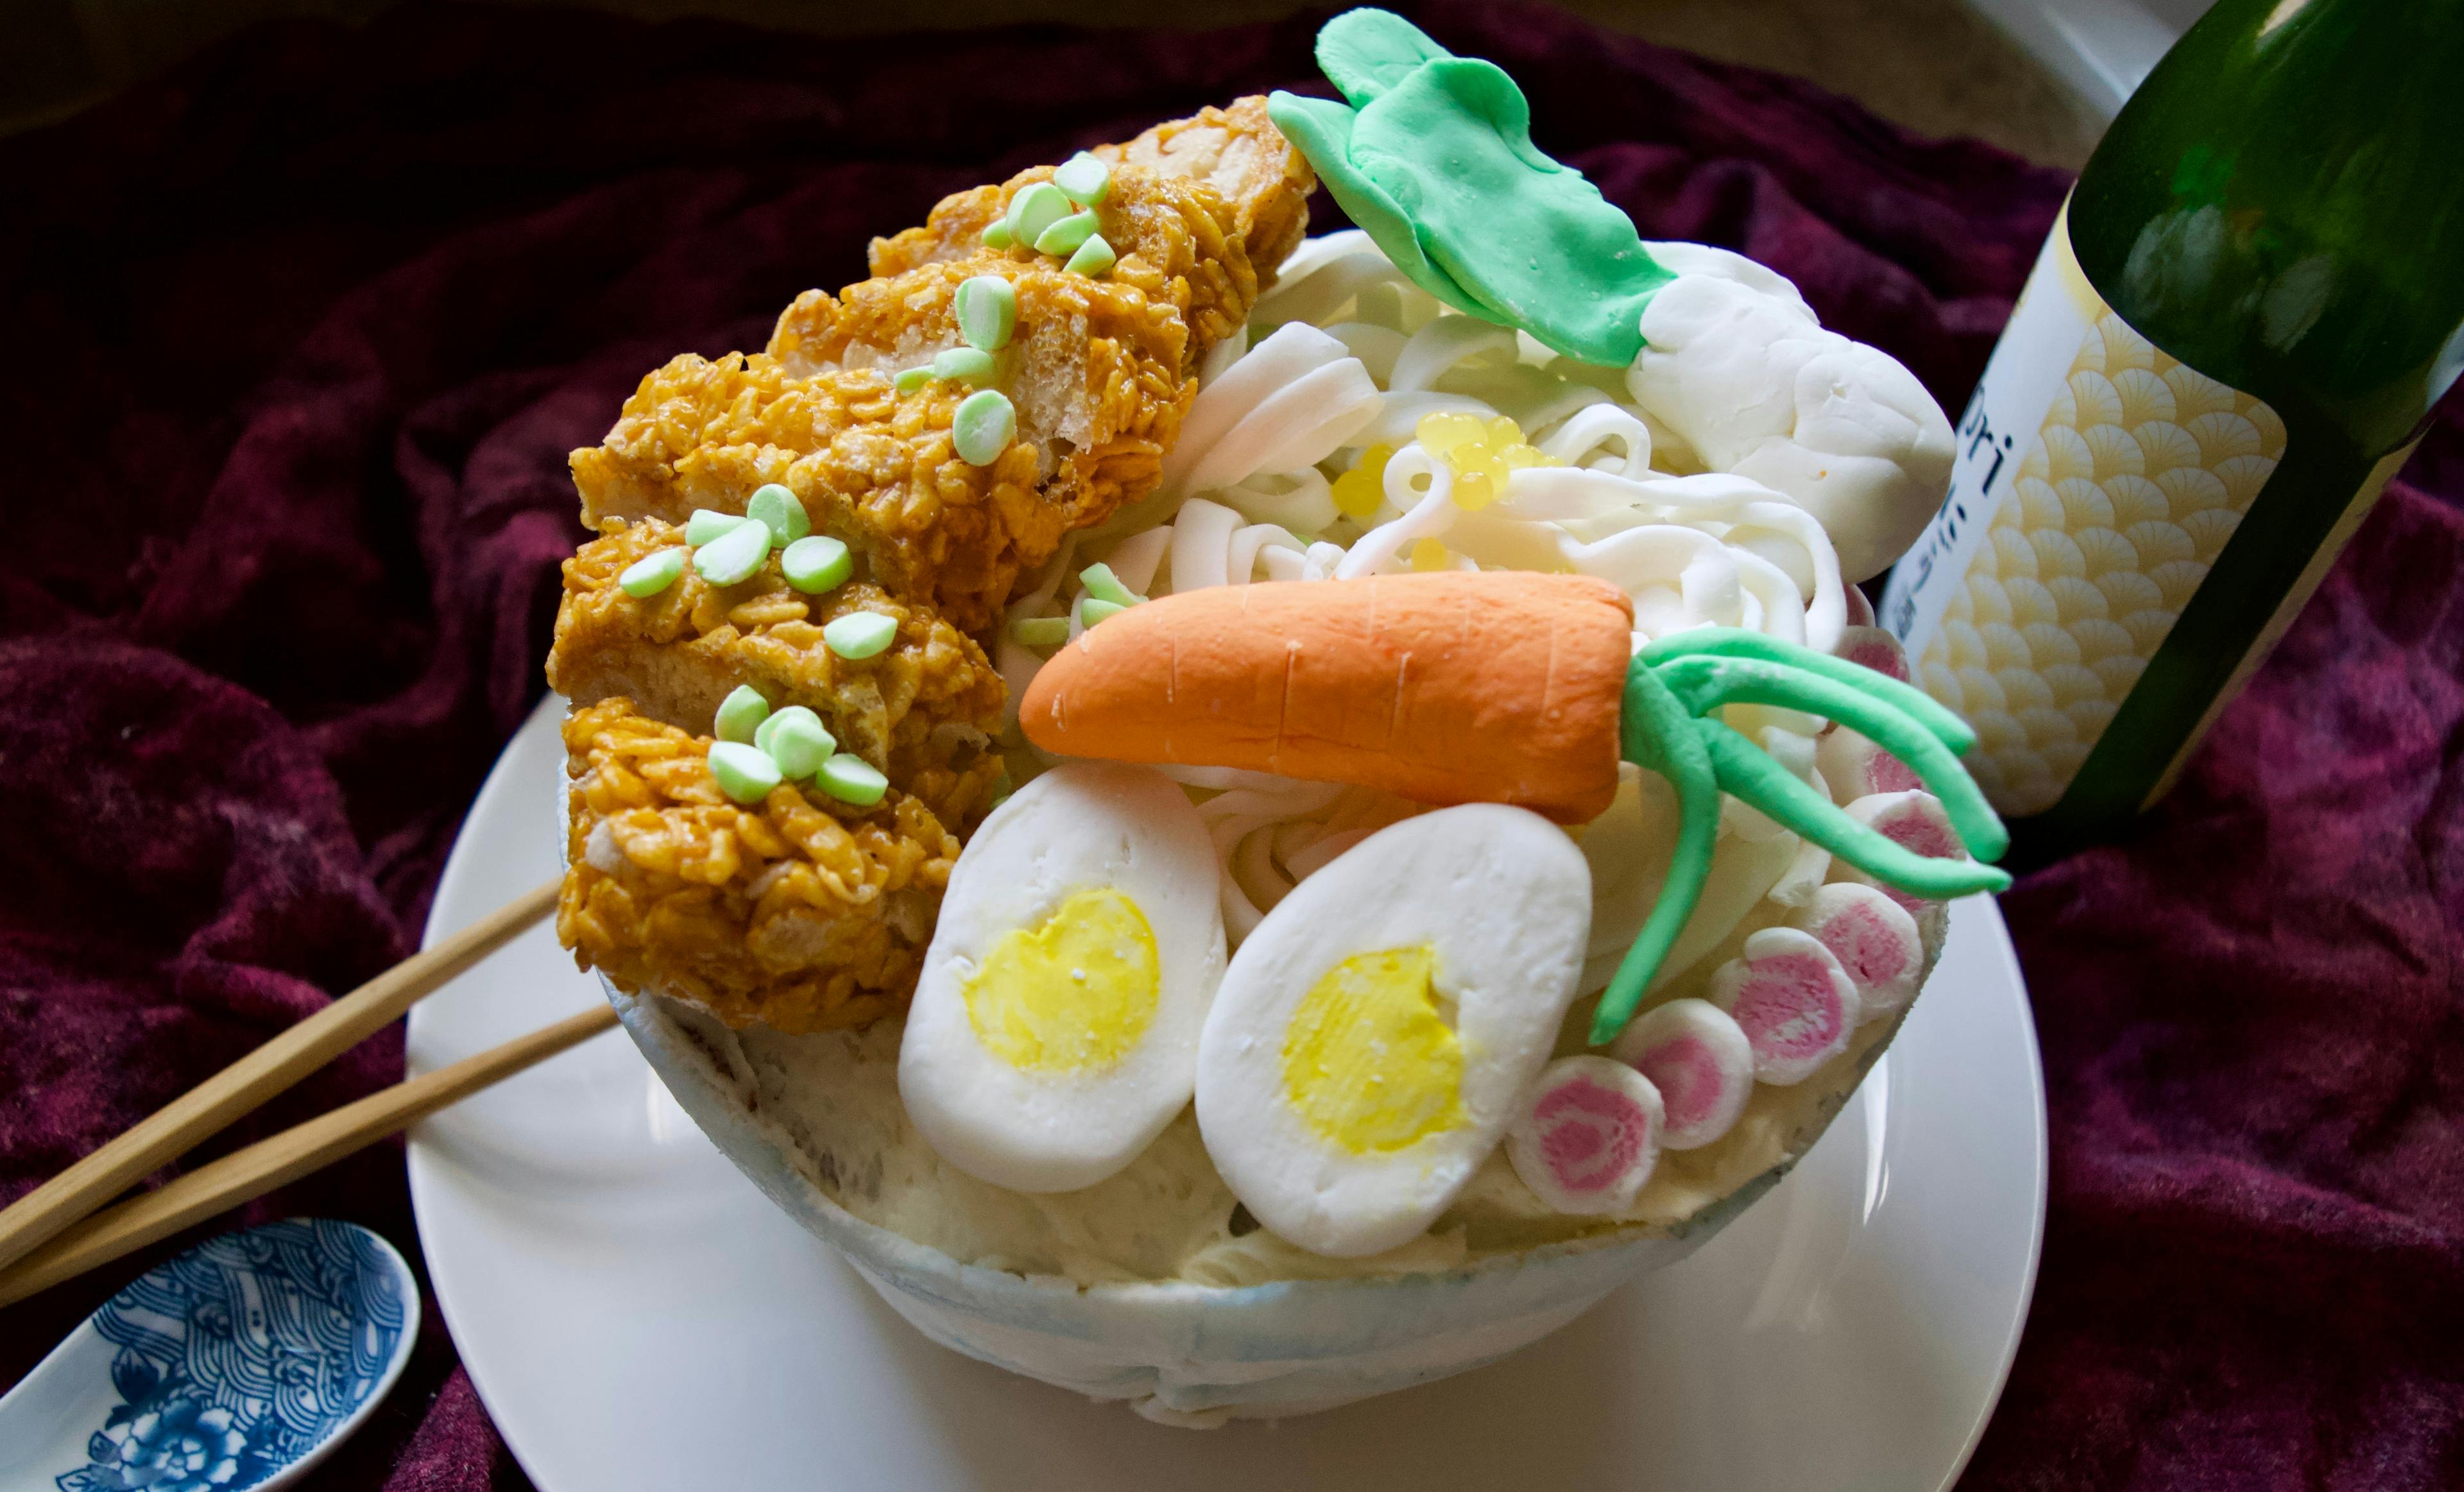 A cake decorated to look like a bowl of ramen.